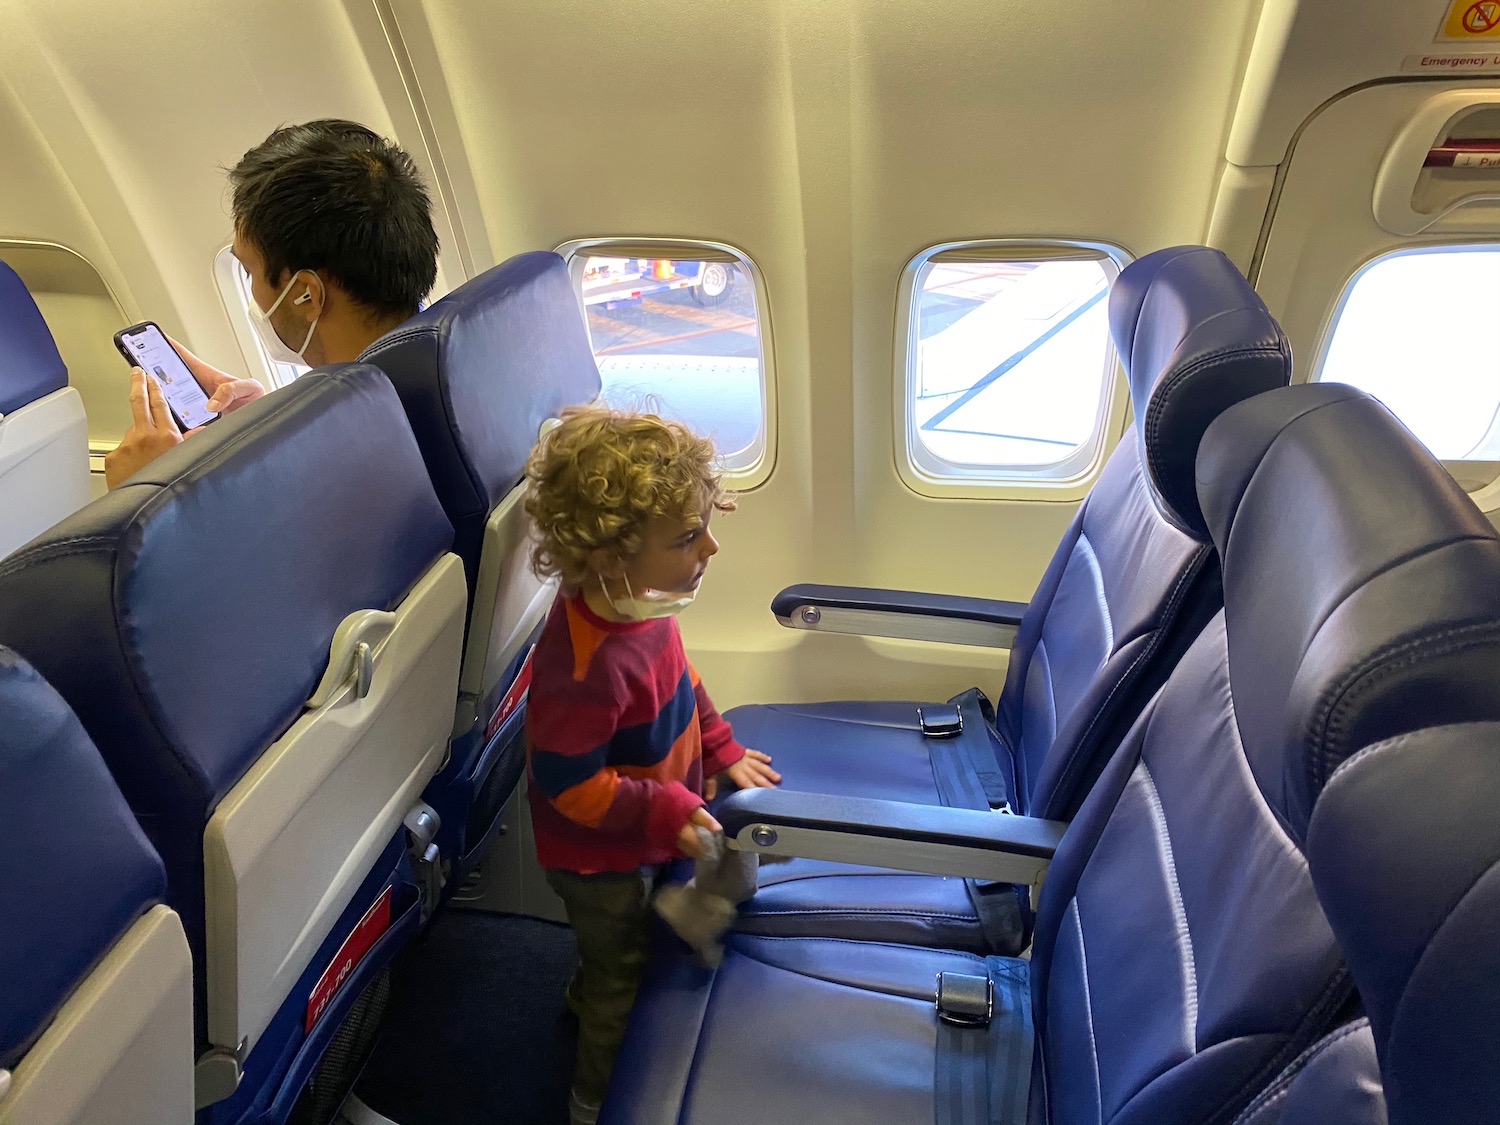 a child standing on a seat in an airplane